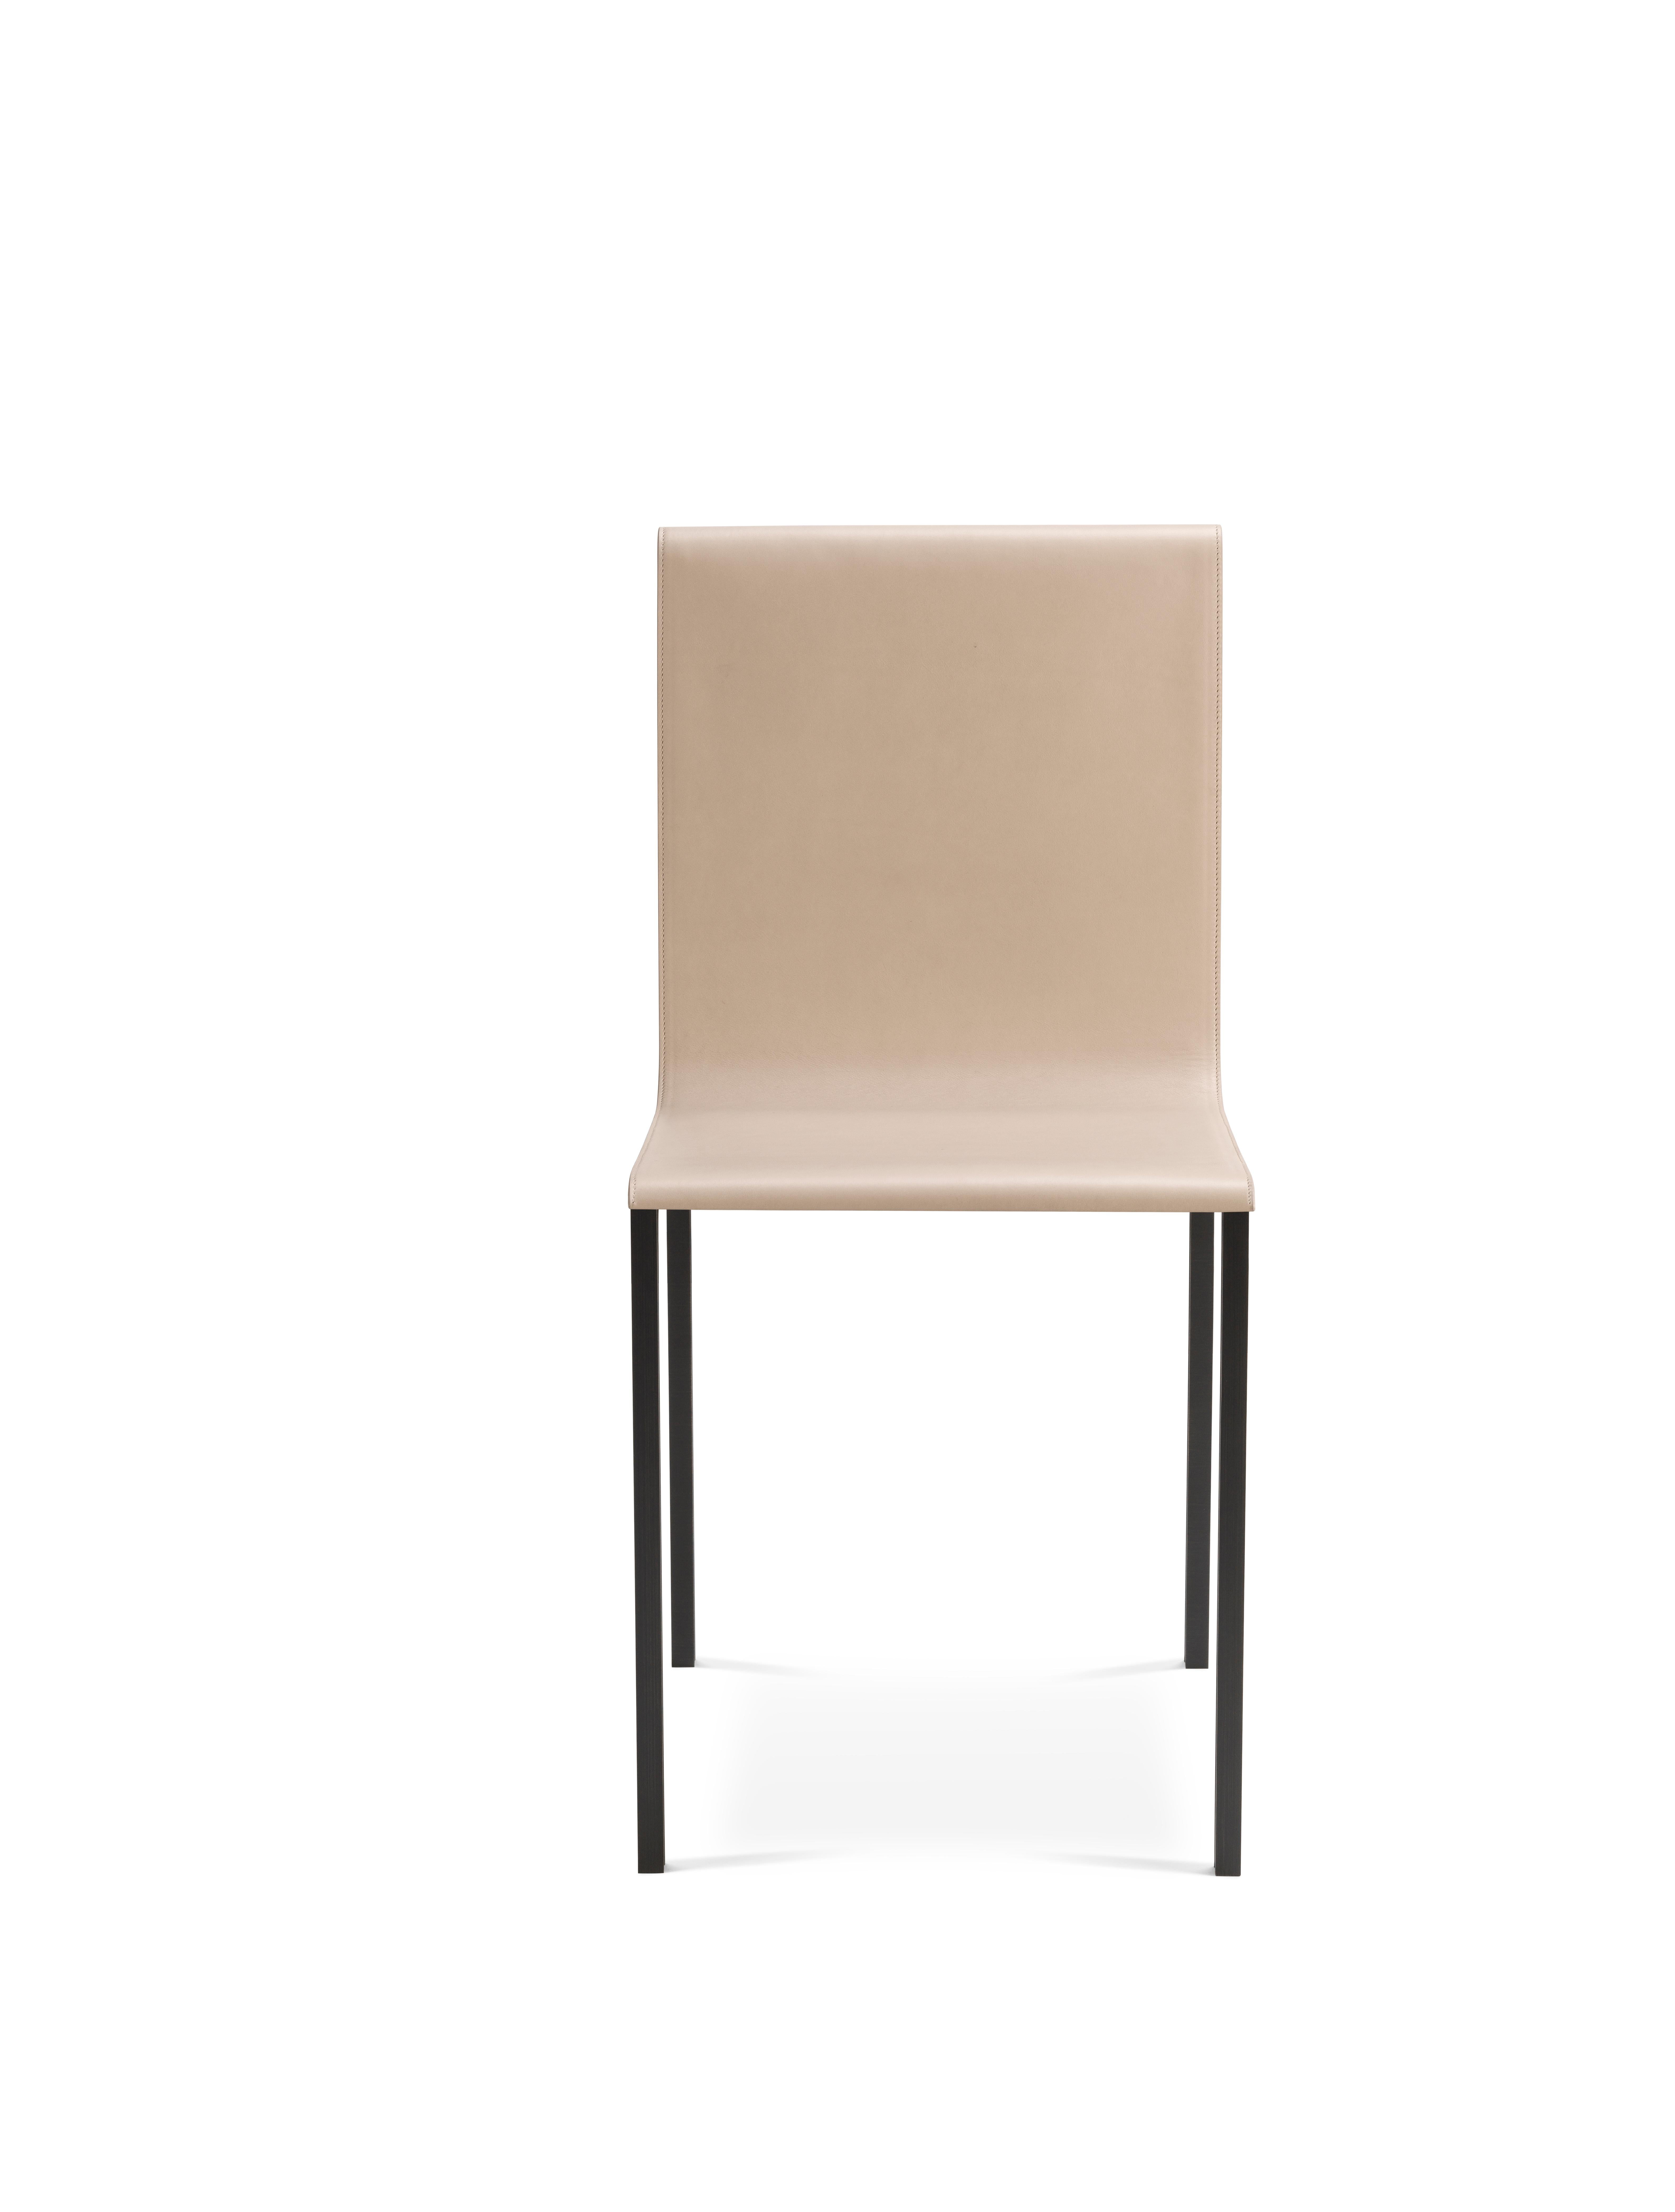 Italian Fabbrica Chair Hardleather Nocciola and Burnished Brass Strcuture, Made in Italy For Sale